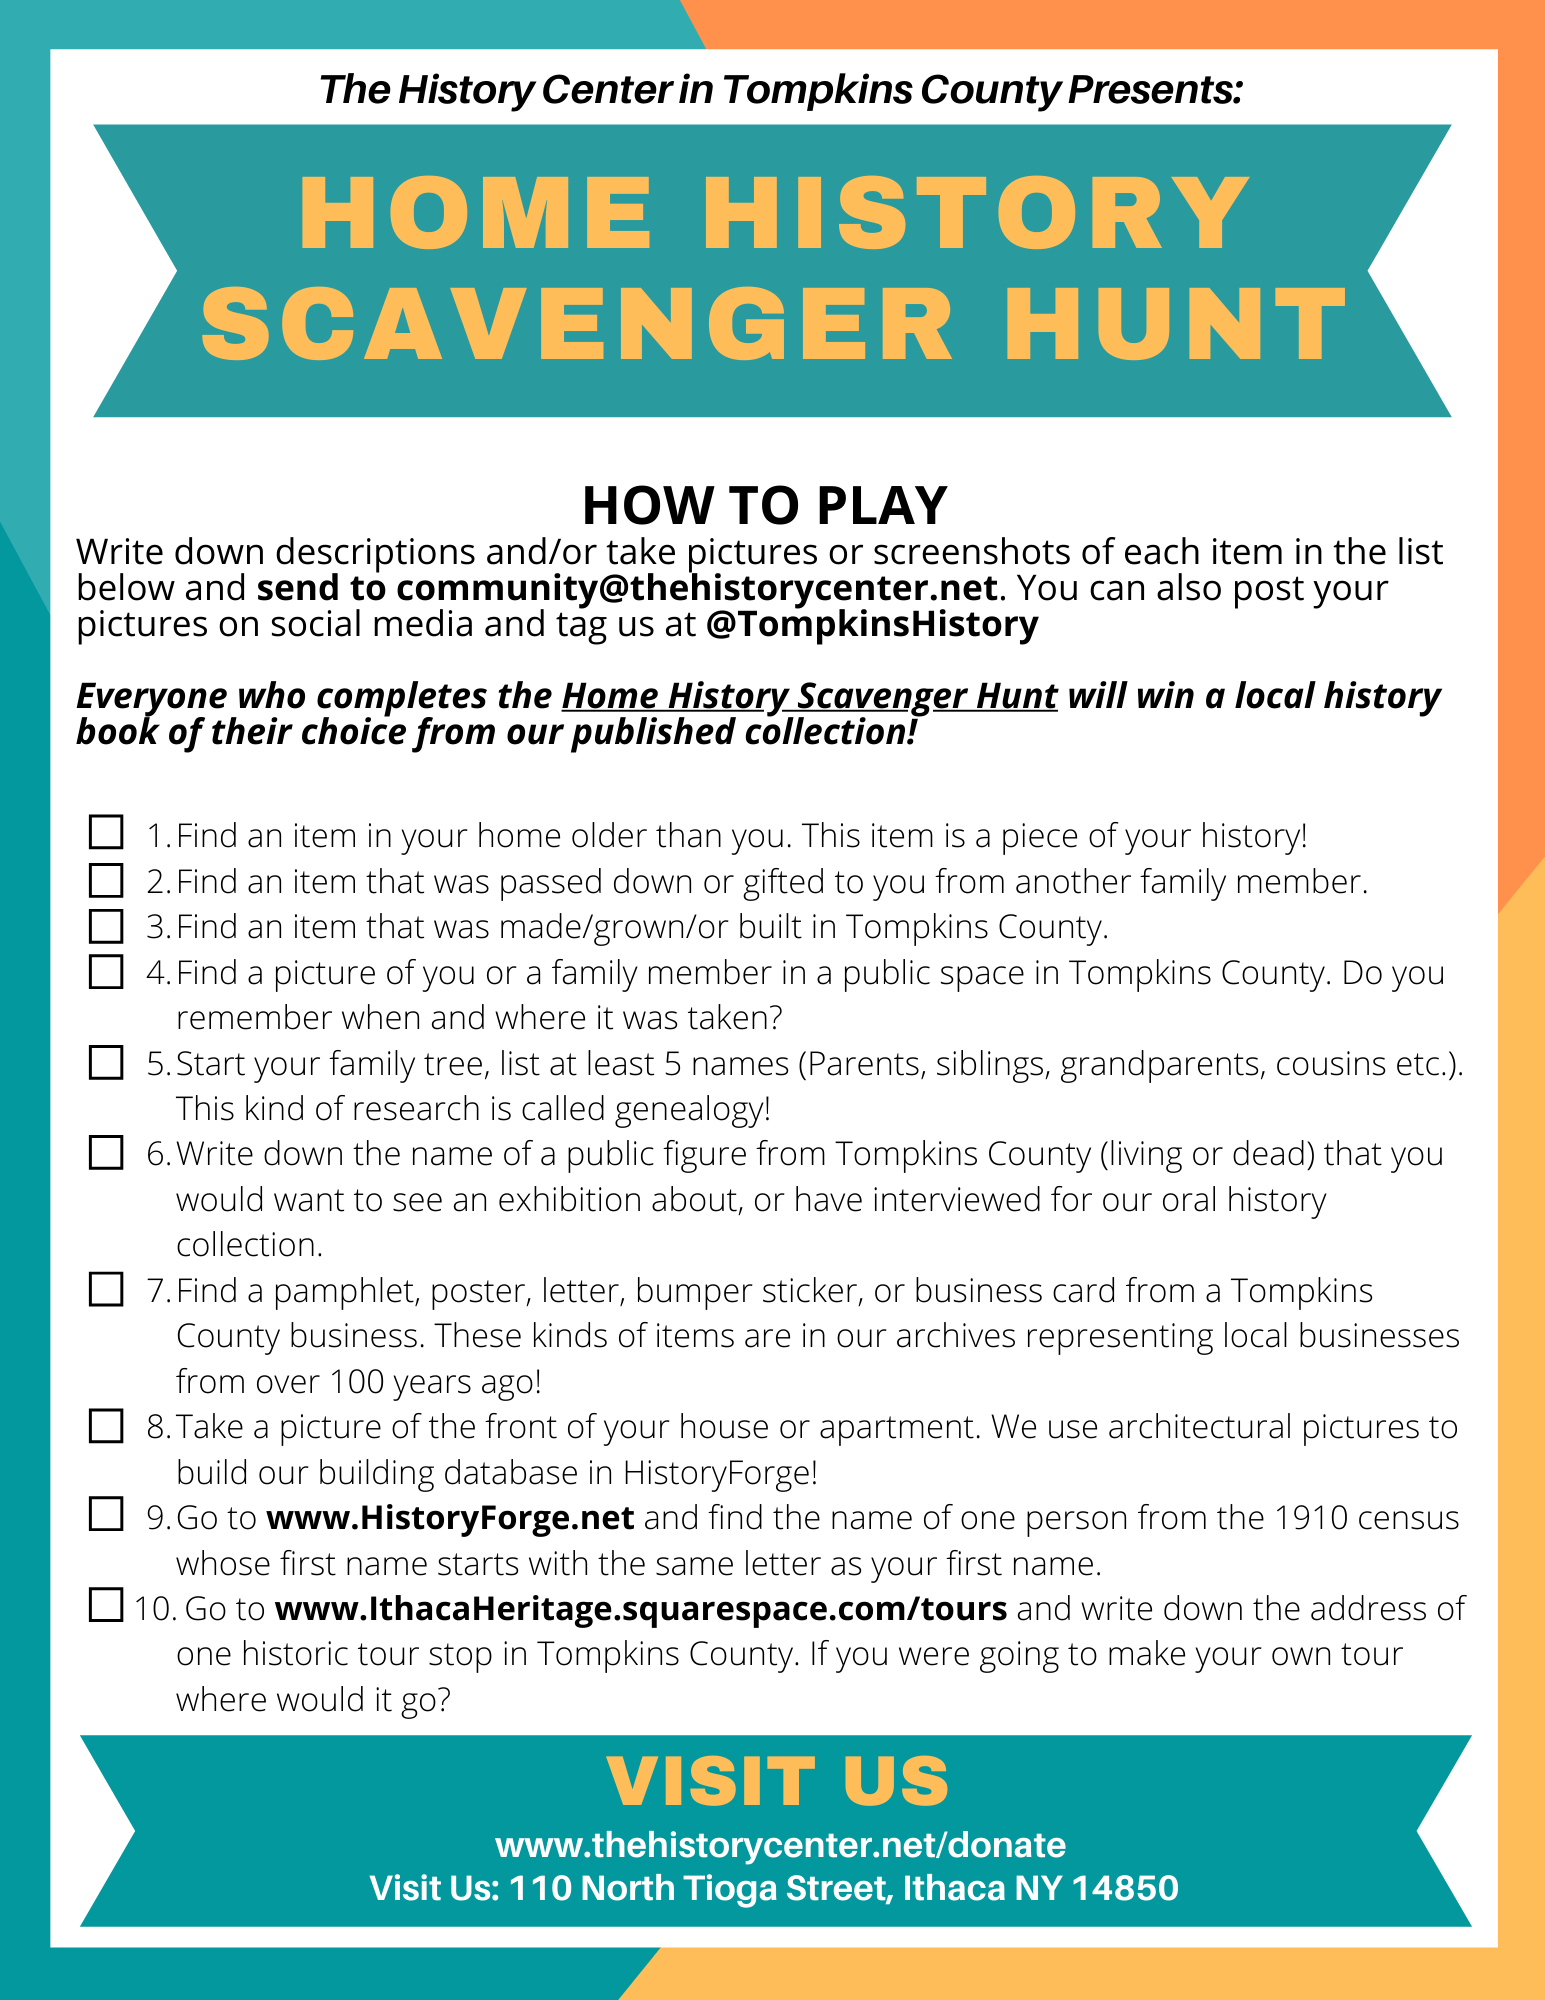 A link/image to download the home history scavenger hunt